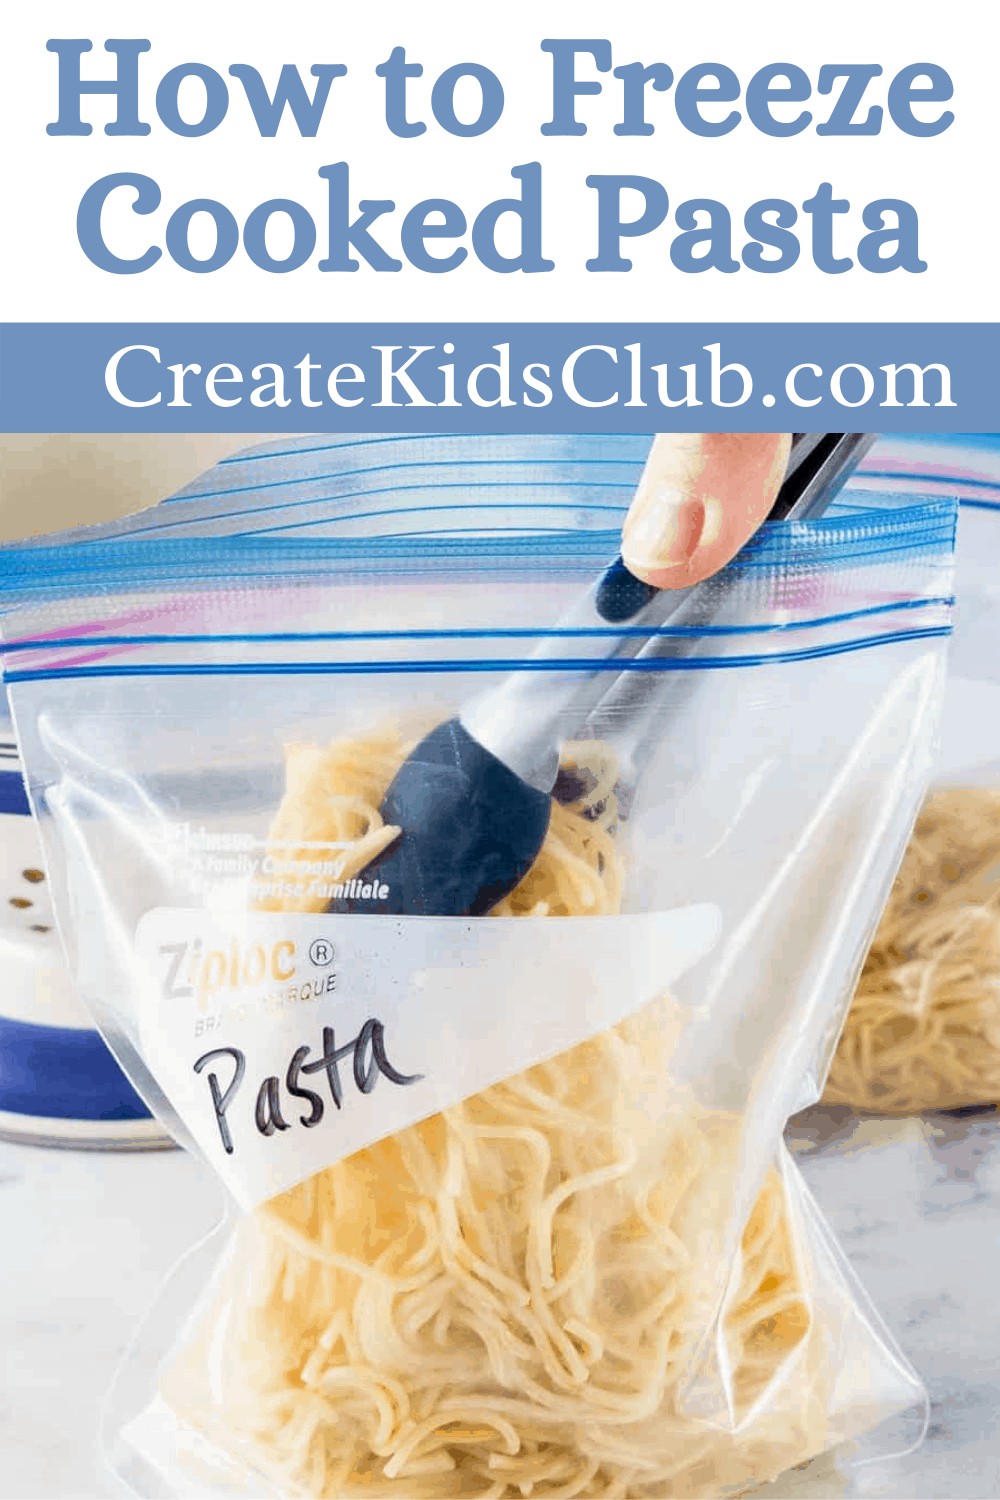 How to Freeze Cooked Pasta